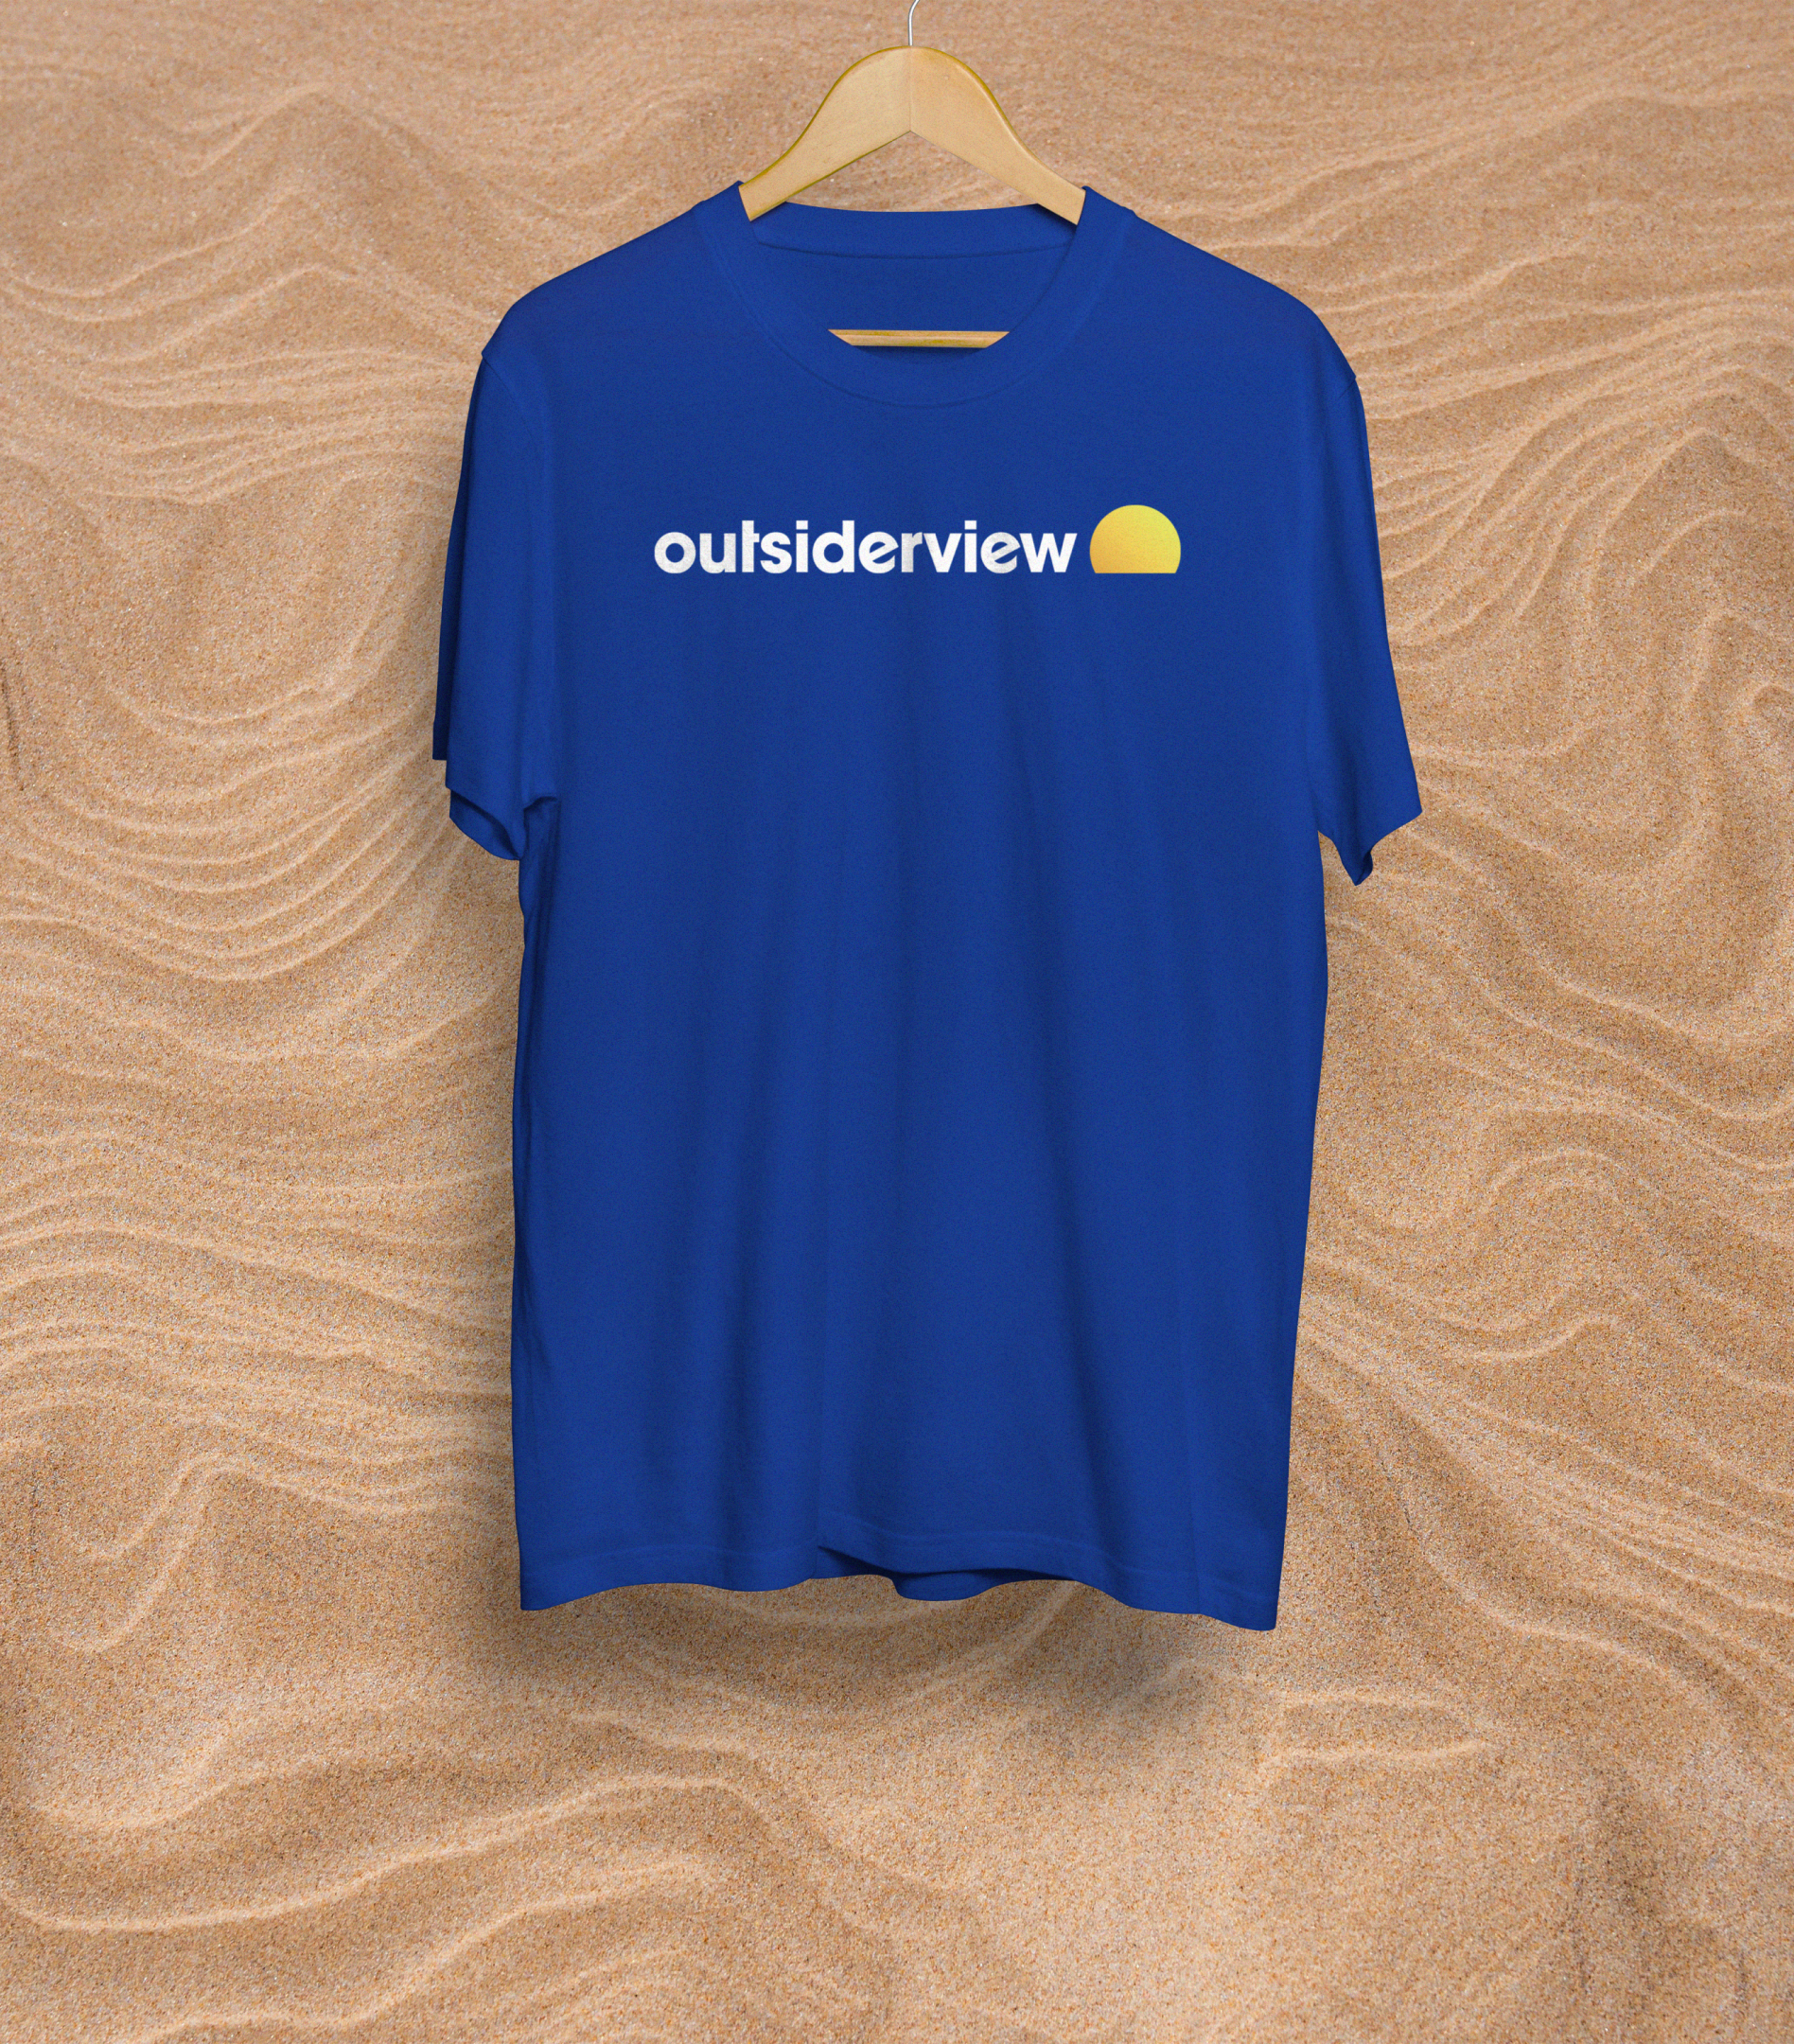 Mockup of deep blue t-shirt branded with the OutsiderView logo